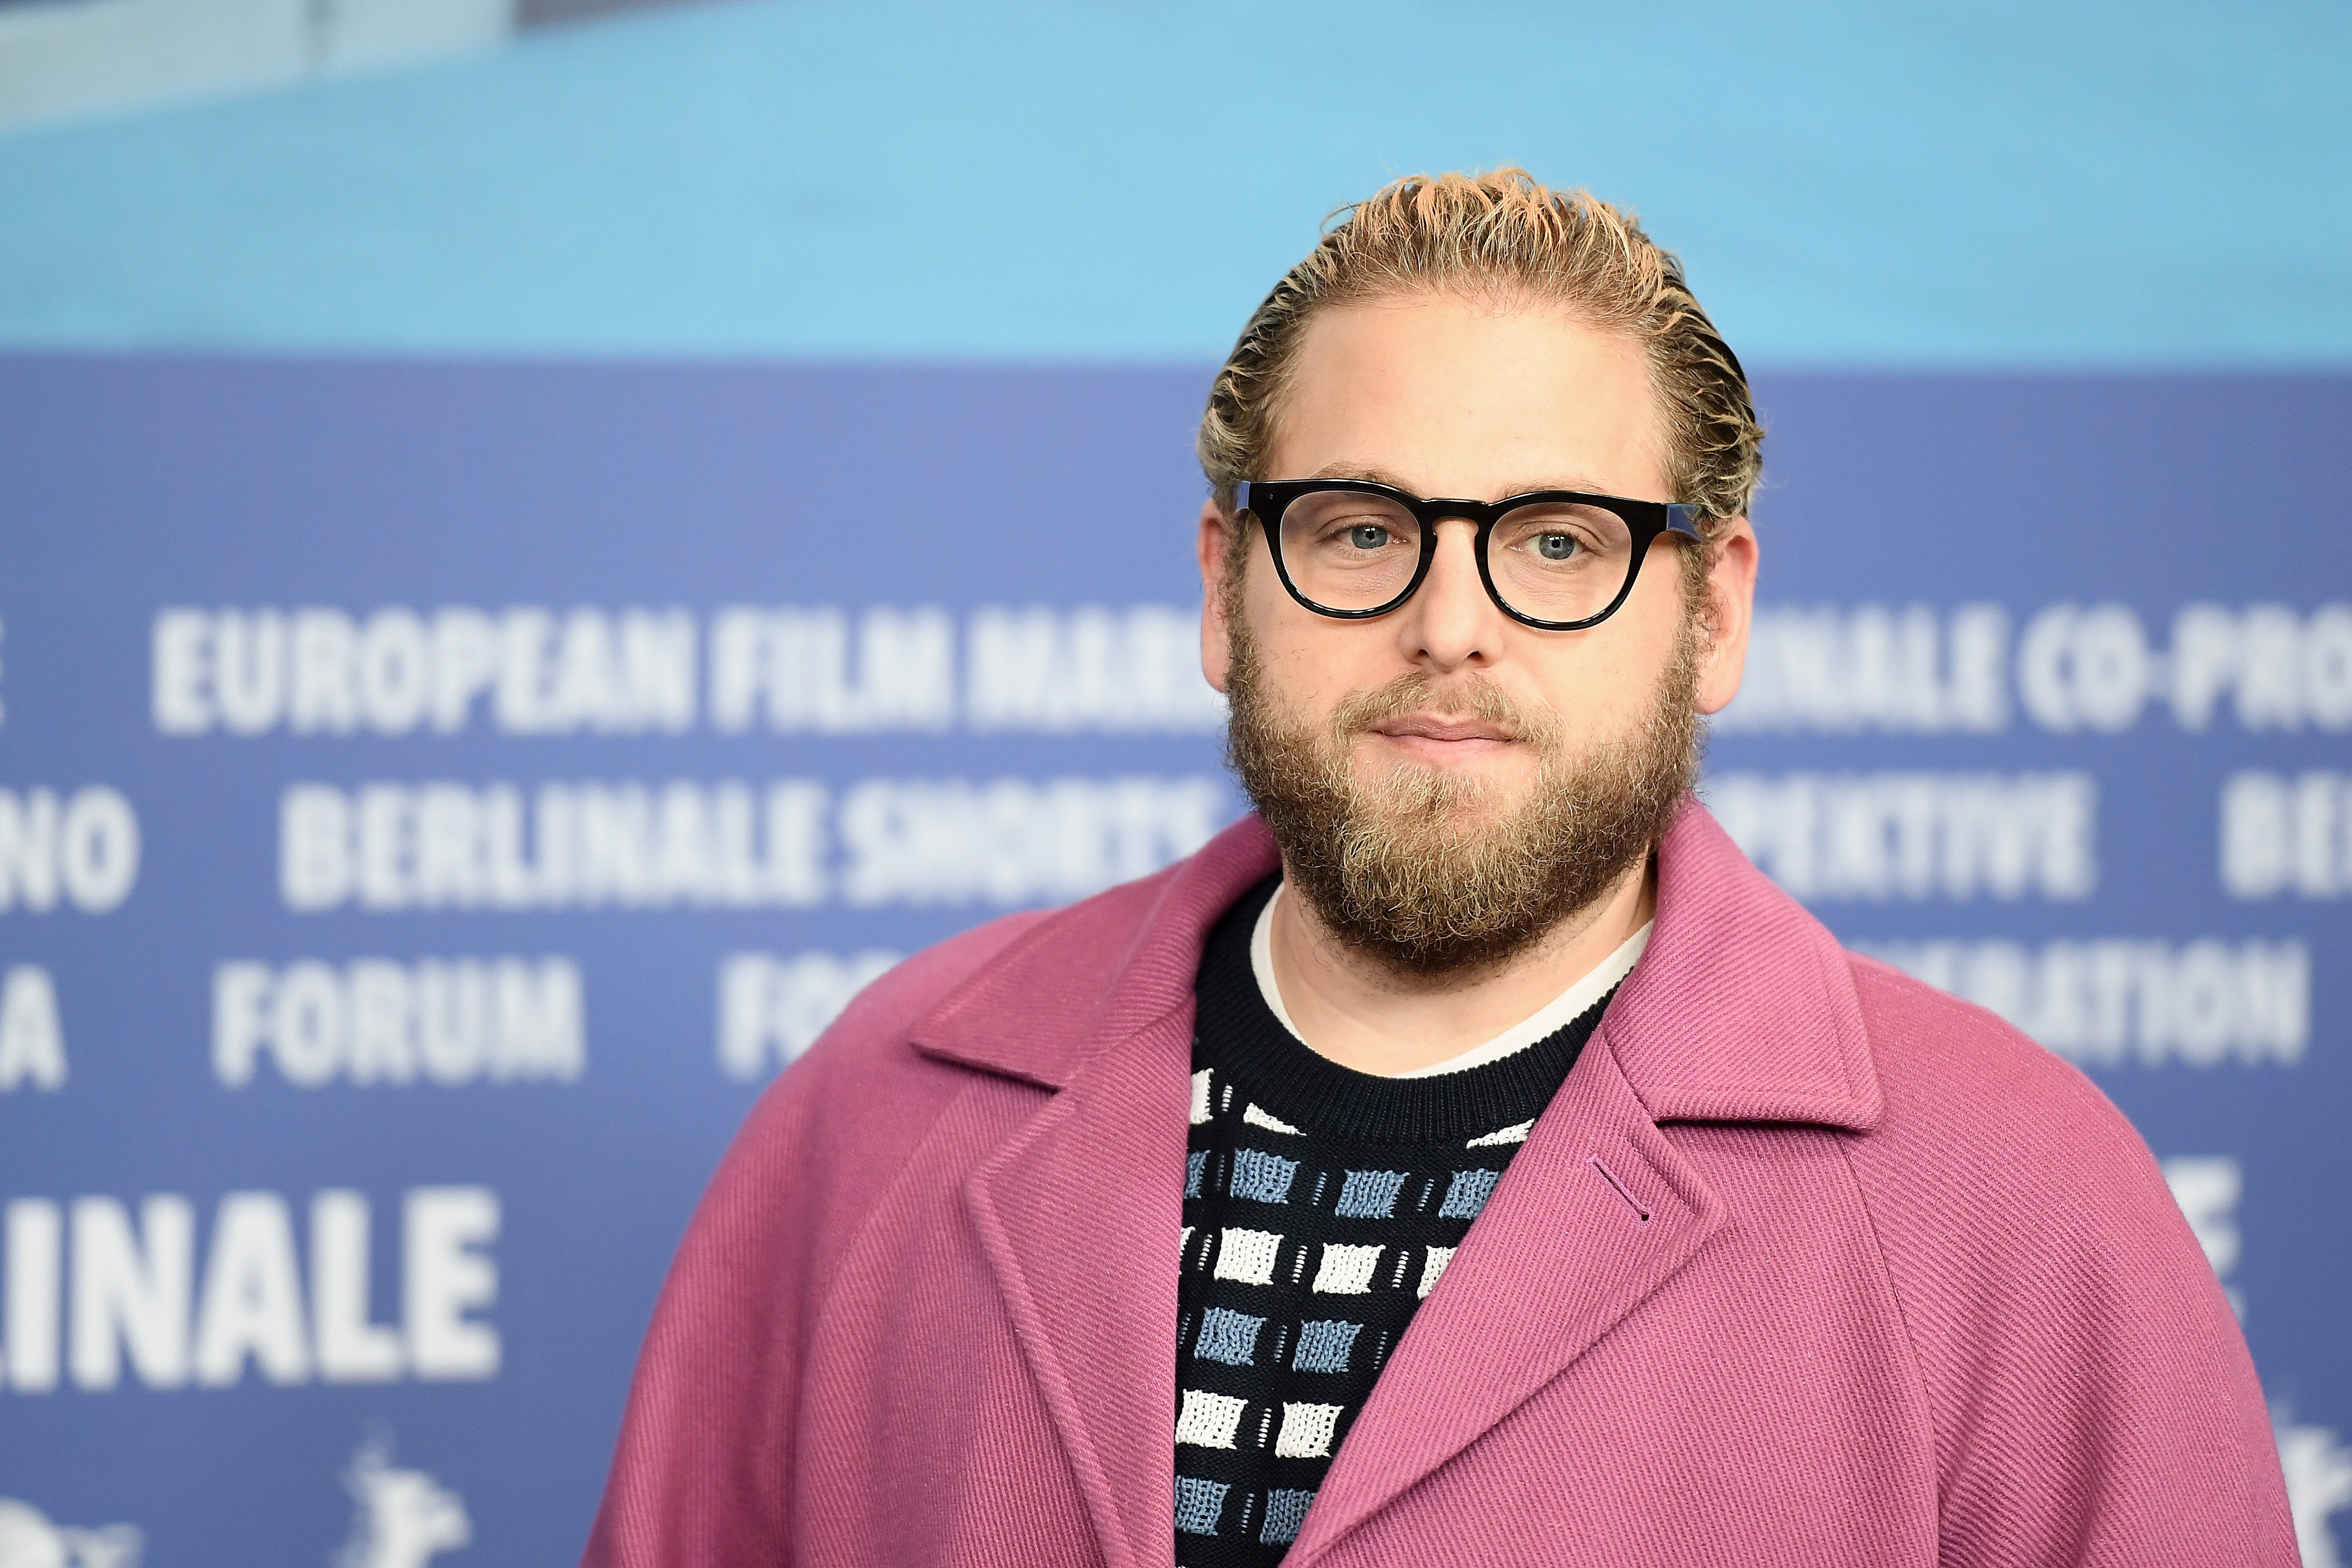 Jonah Hill beats back on the beach day photos focused on her body: ‘I can’t change anymore’